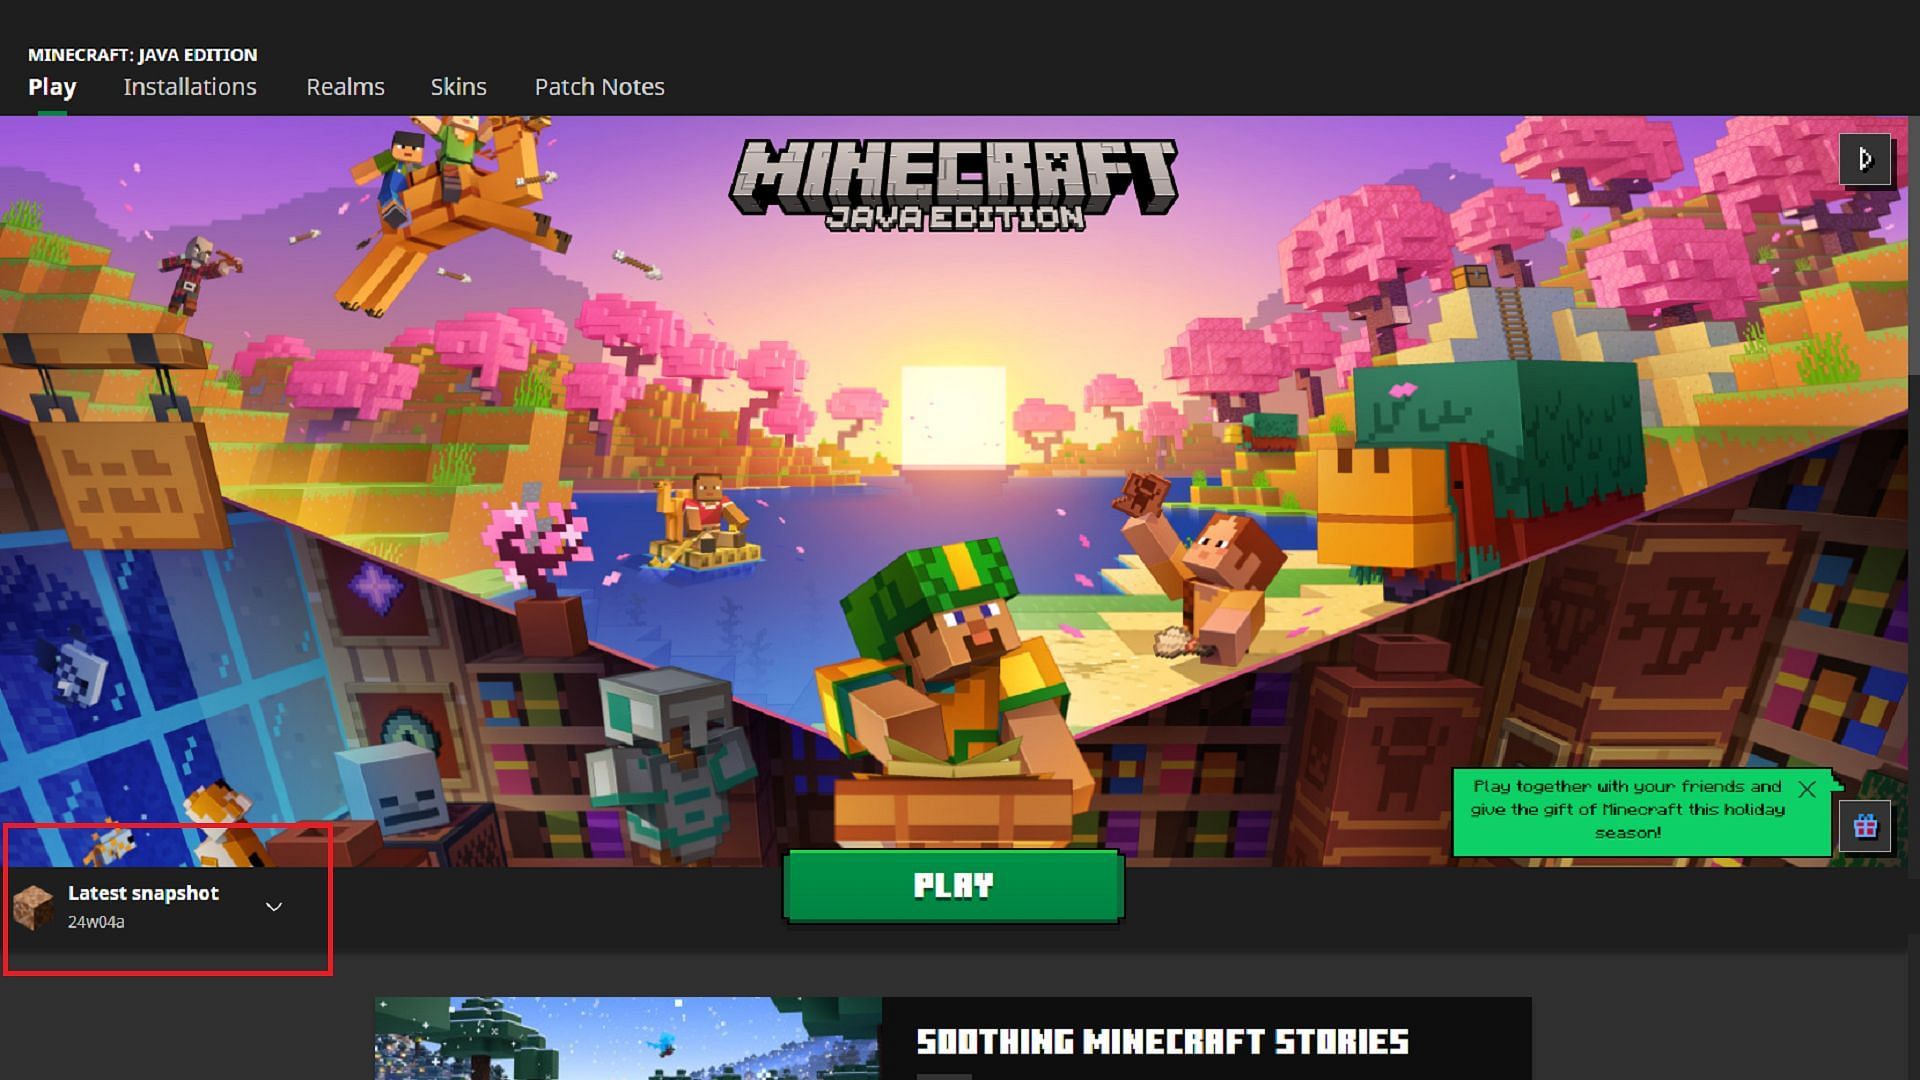 The official game launcher can fully download new snapshots in just a few moments (Image via Mojang)